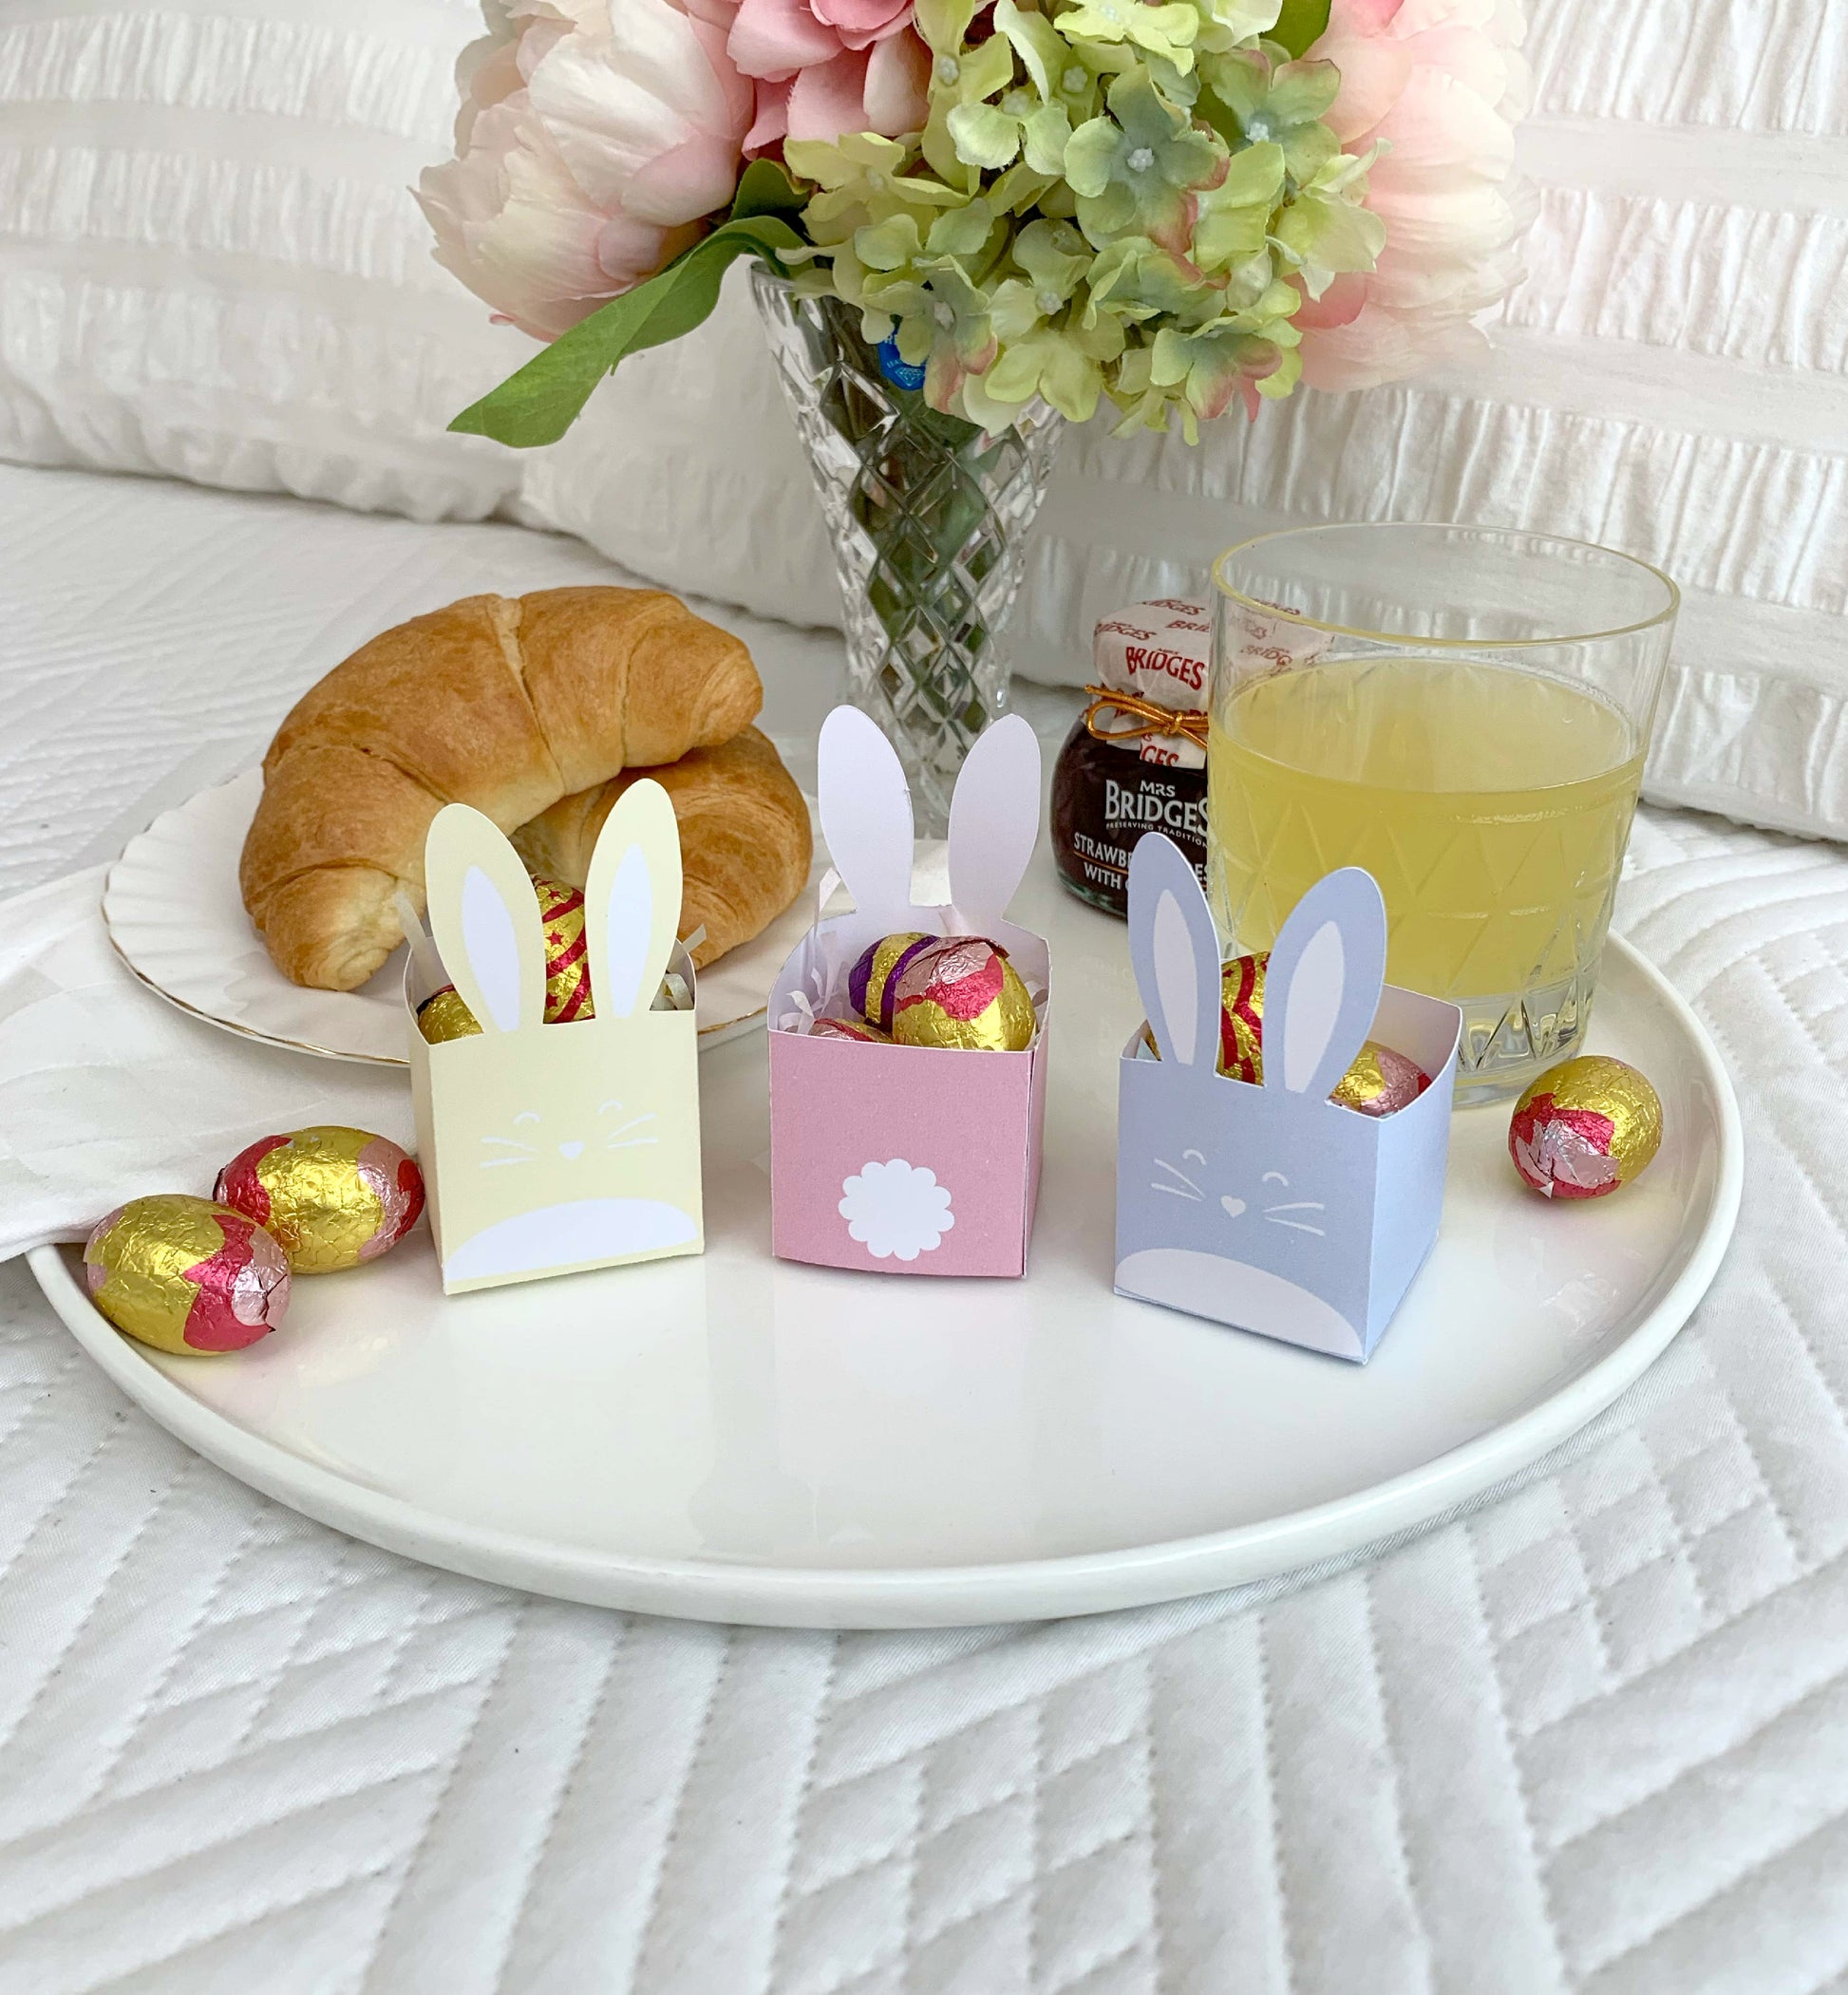 This printable box features a delightful Easter bunny design. It's the perfect size for holding small treats or goodies, making it a great option for Easter egg hunts, Easter baskets, or even just as a cute decoration on your Easter table.